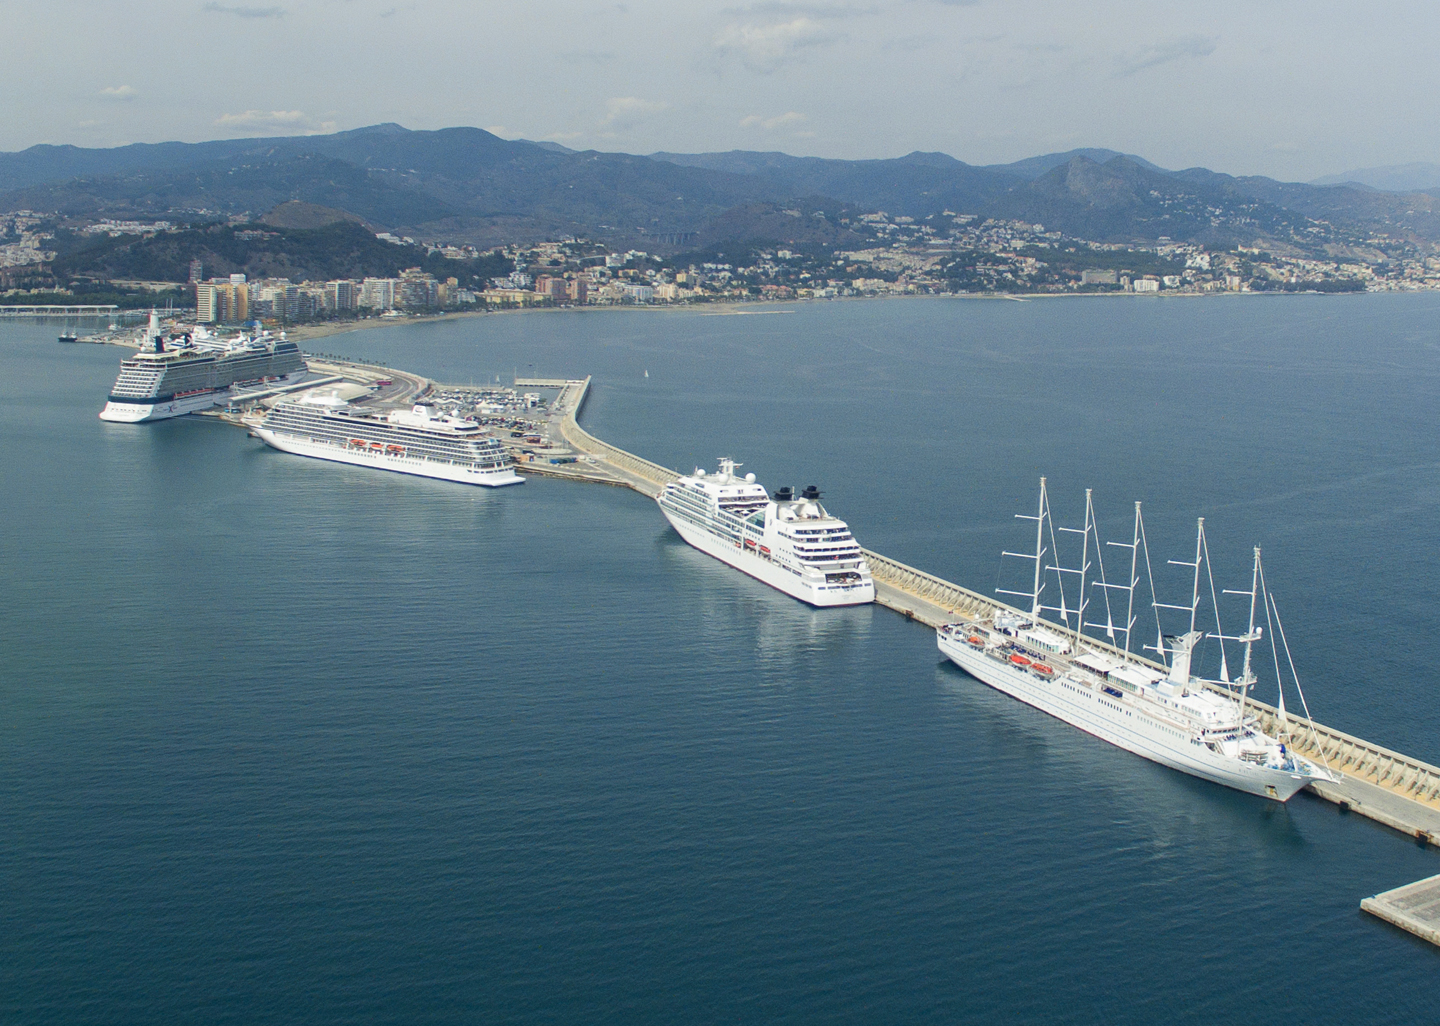 The port of Malaga will receive 113 cruise calls during the autumn season